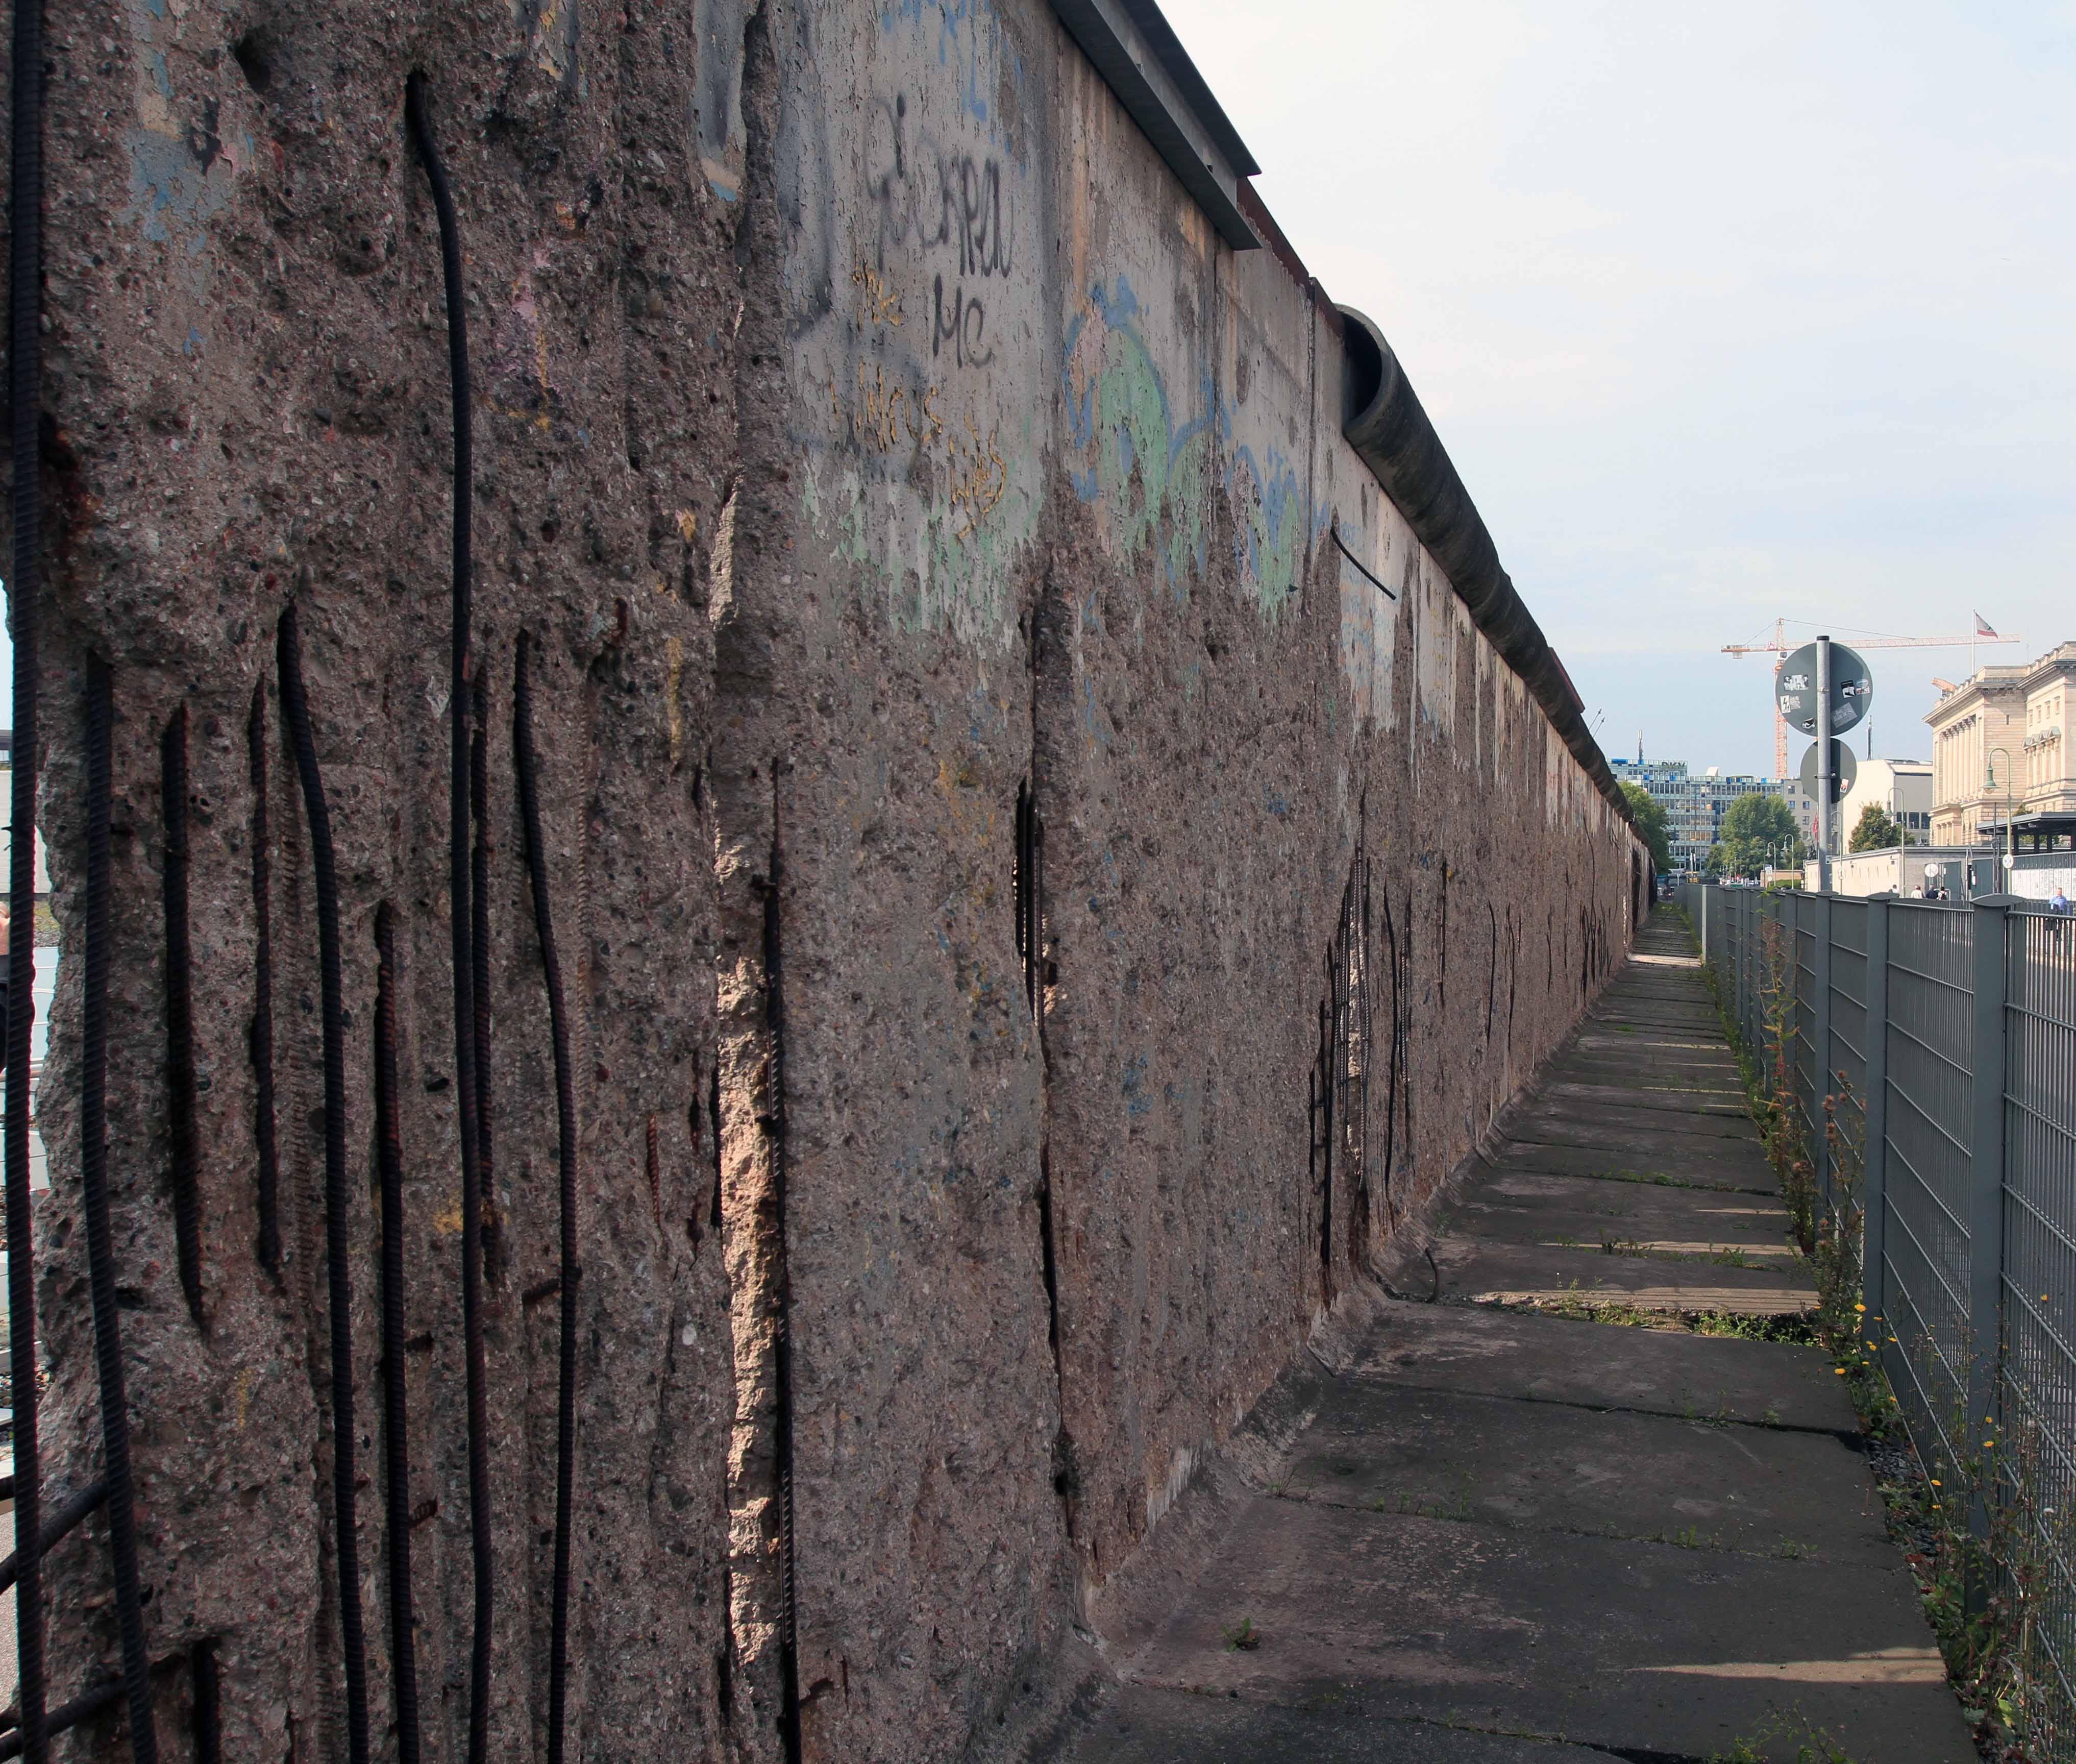 A 200 meter section of the Berlin Wall, still standing, next to the Topography of Terror Museum (located at the former site of the Gestapo and SS headquarters).